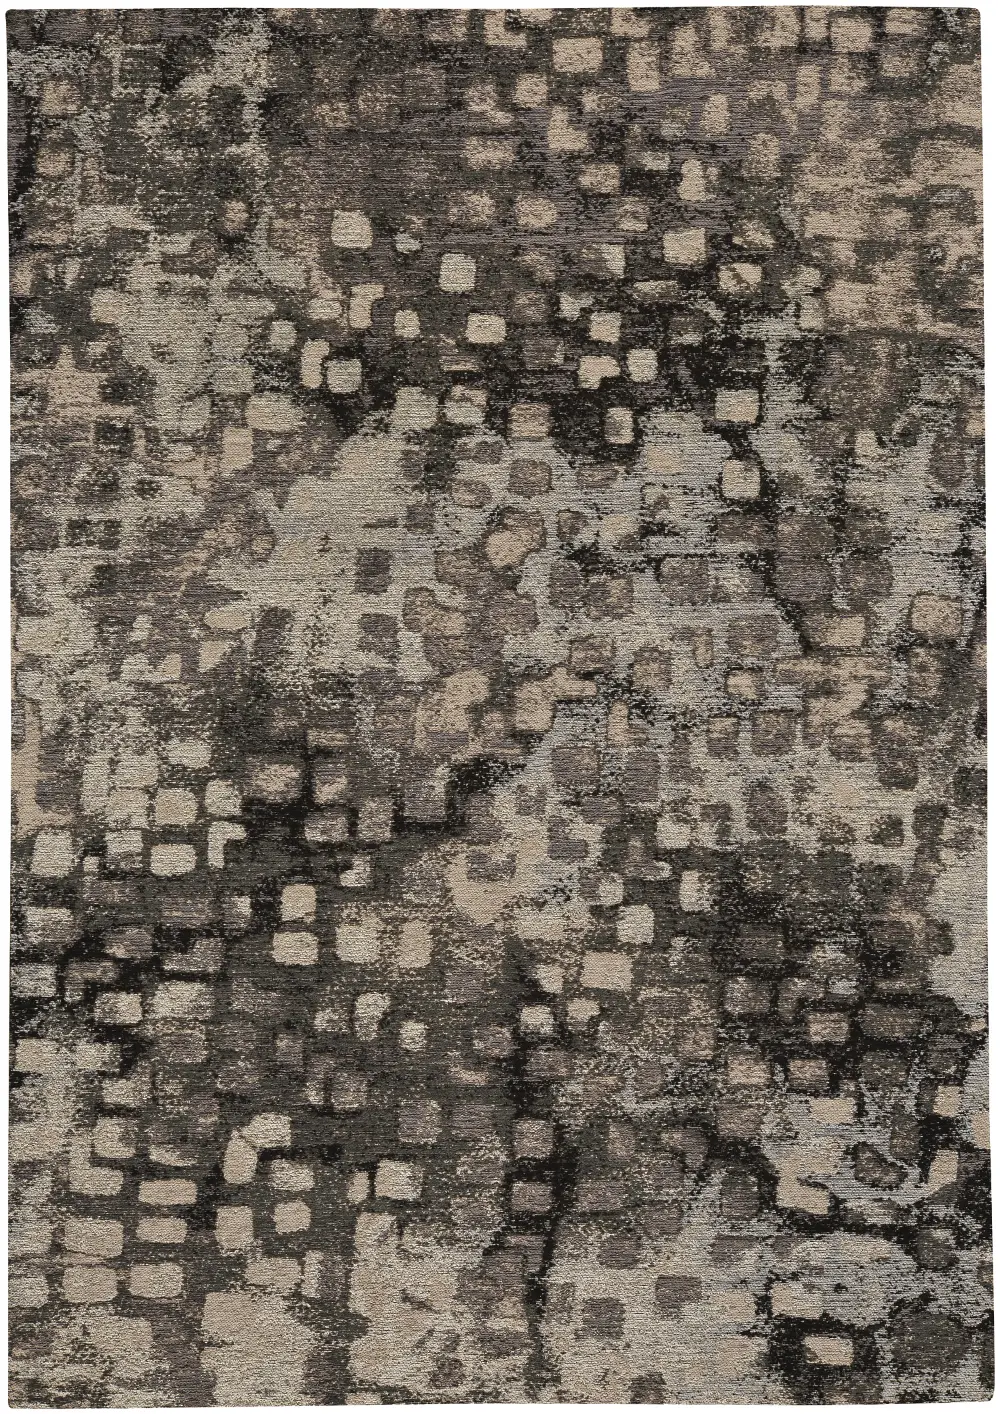 3241RS08001000300 8 x 10 Large Charcoal Gray Area Rug - Cosmic-Cobblestone-1